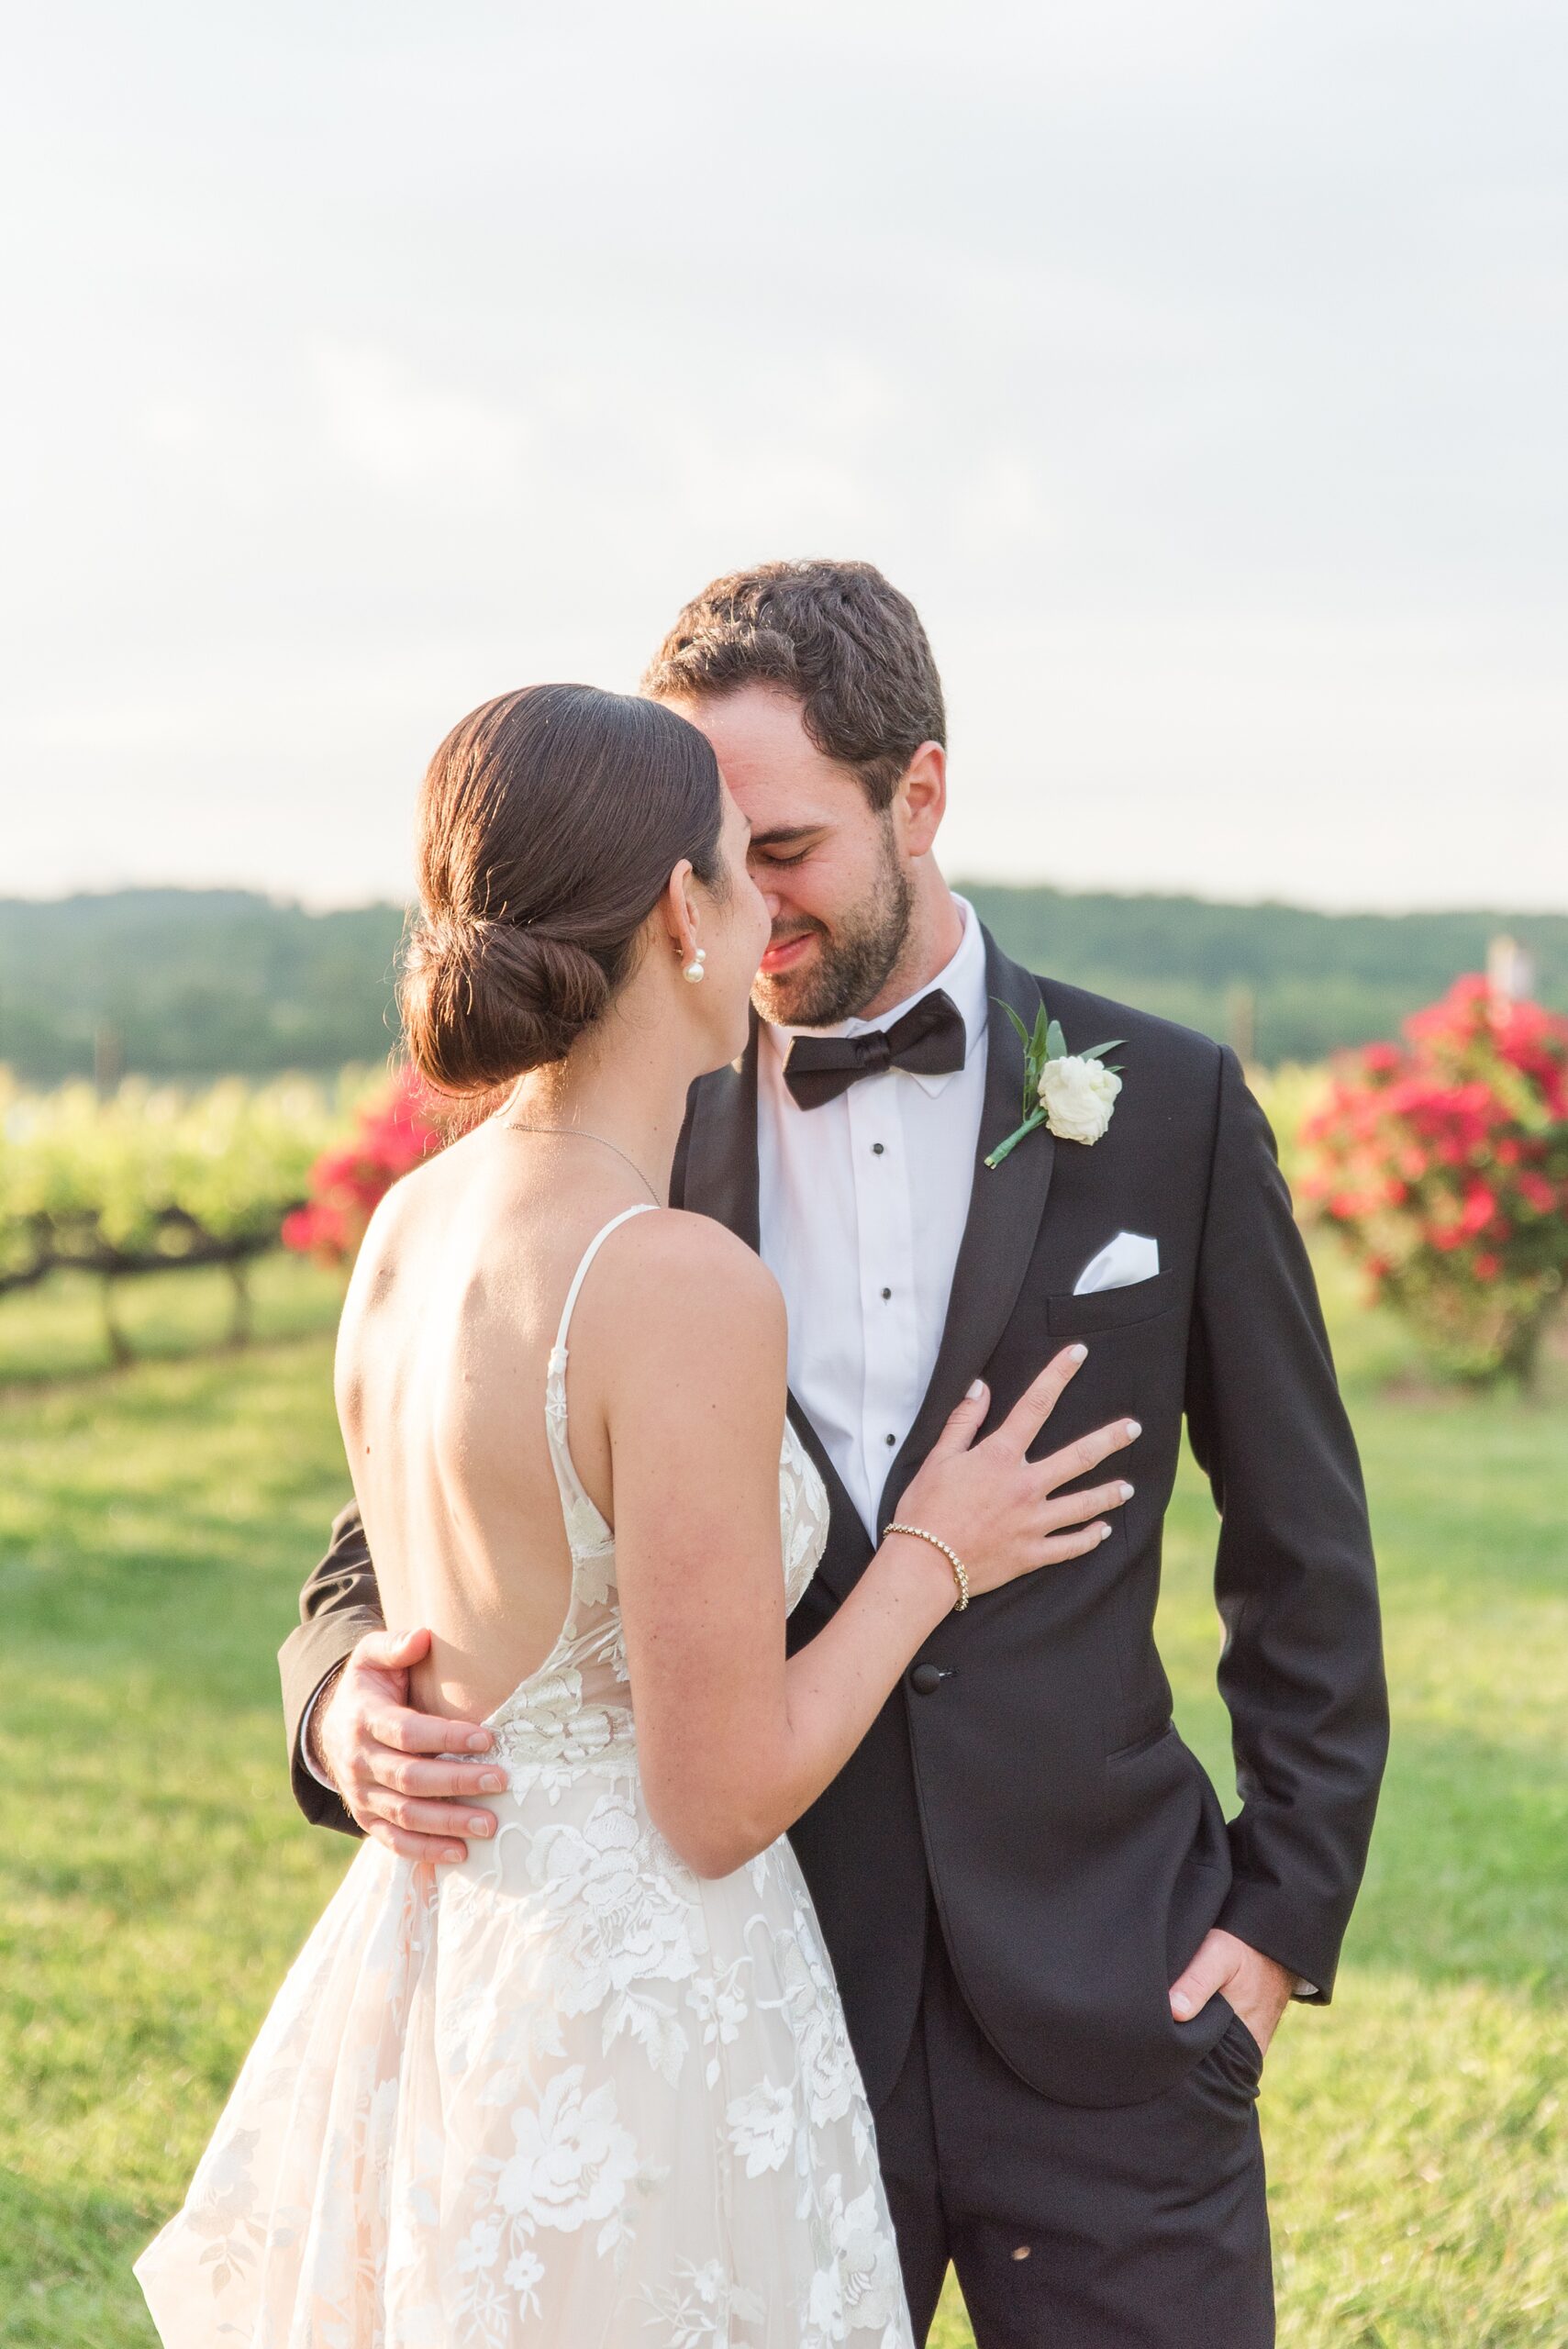 Newlyweds share an intimate moment on a lawn with blooming bushes at sunset